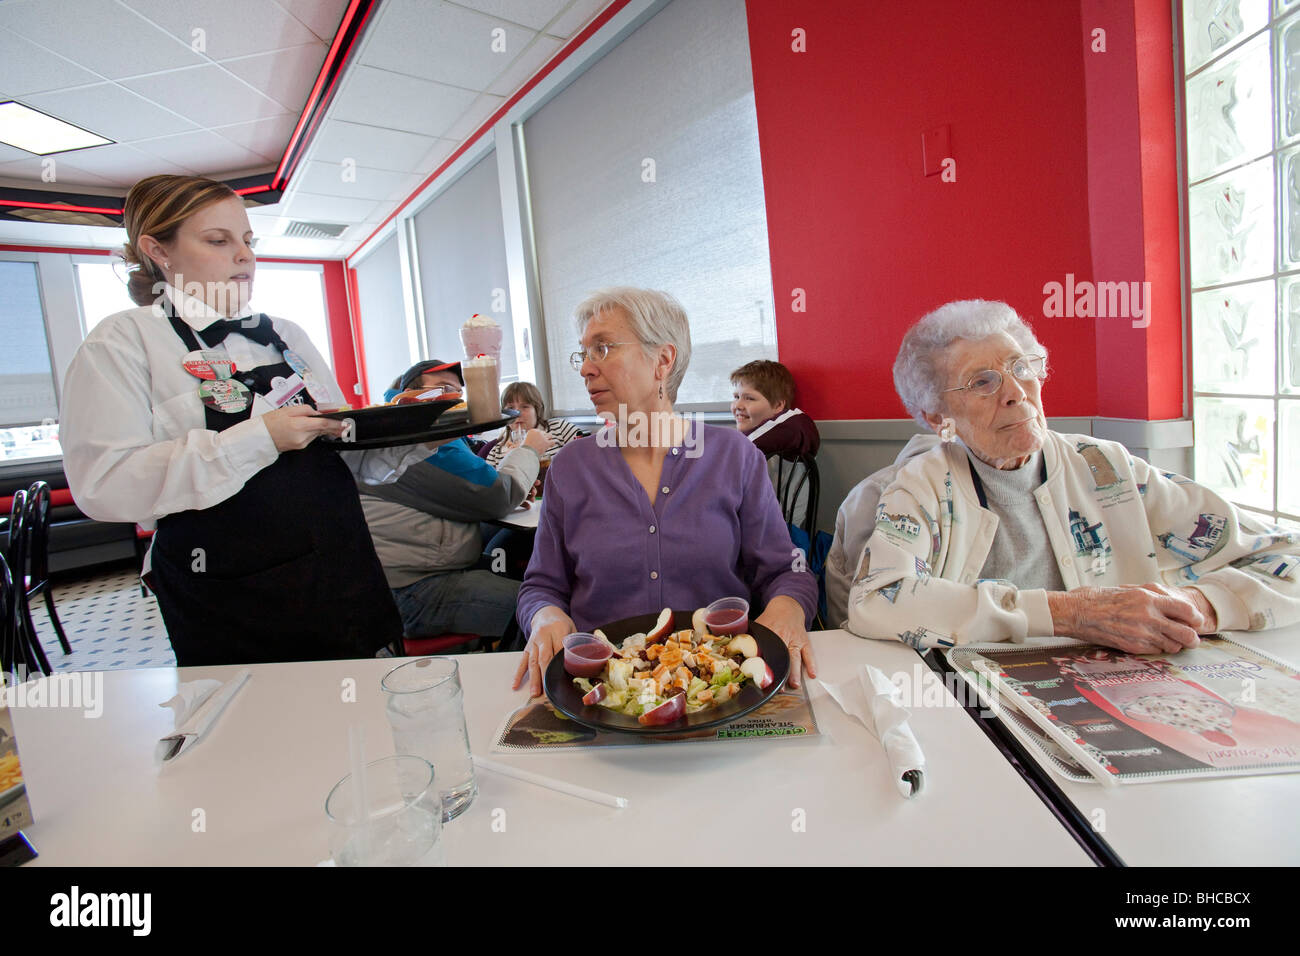 Indianapolis, Indiana - A waitress serves lunch at a Steak 'n Shake restaurant. Stock Photo